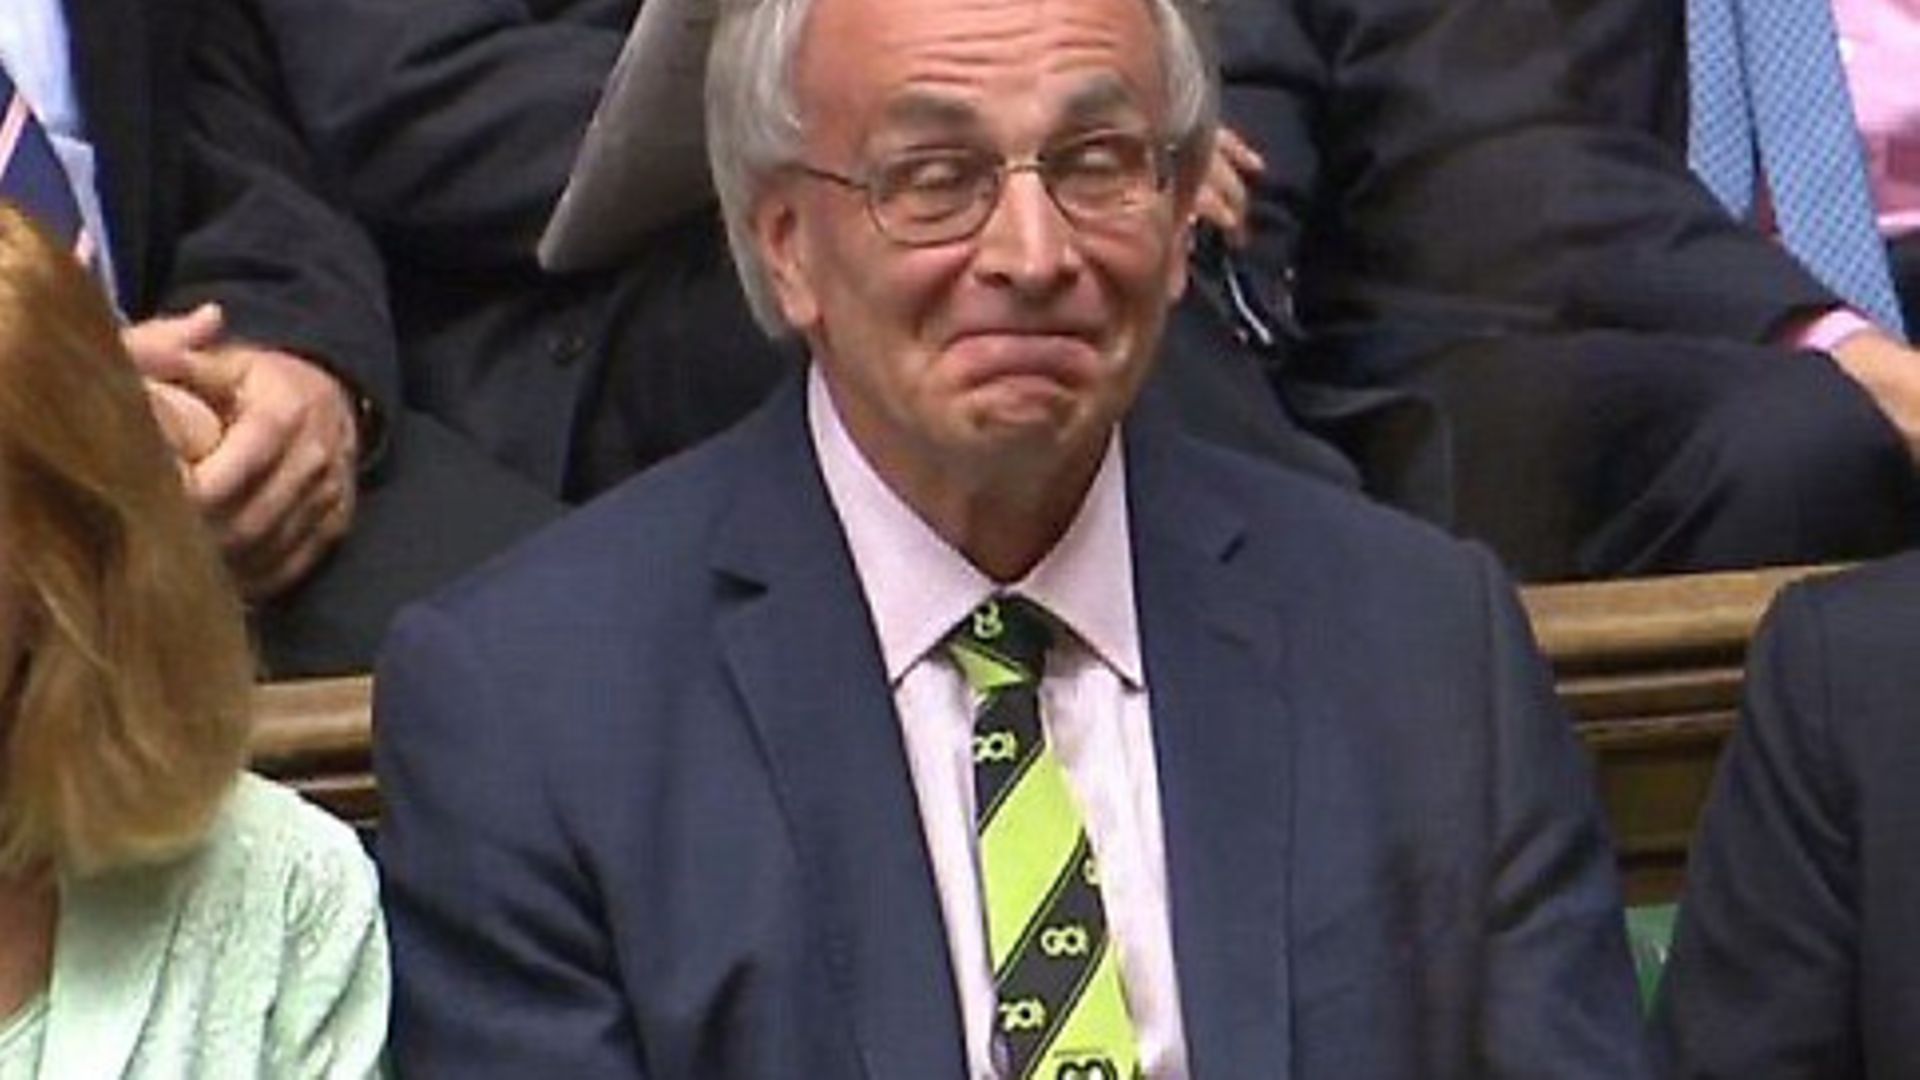 Peter Bone MP in the House of Commons - Credit: Parliament Live